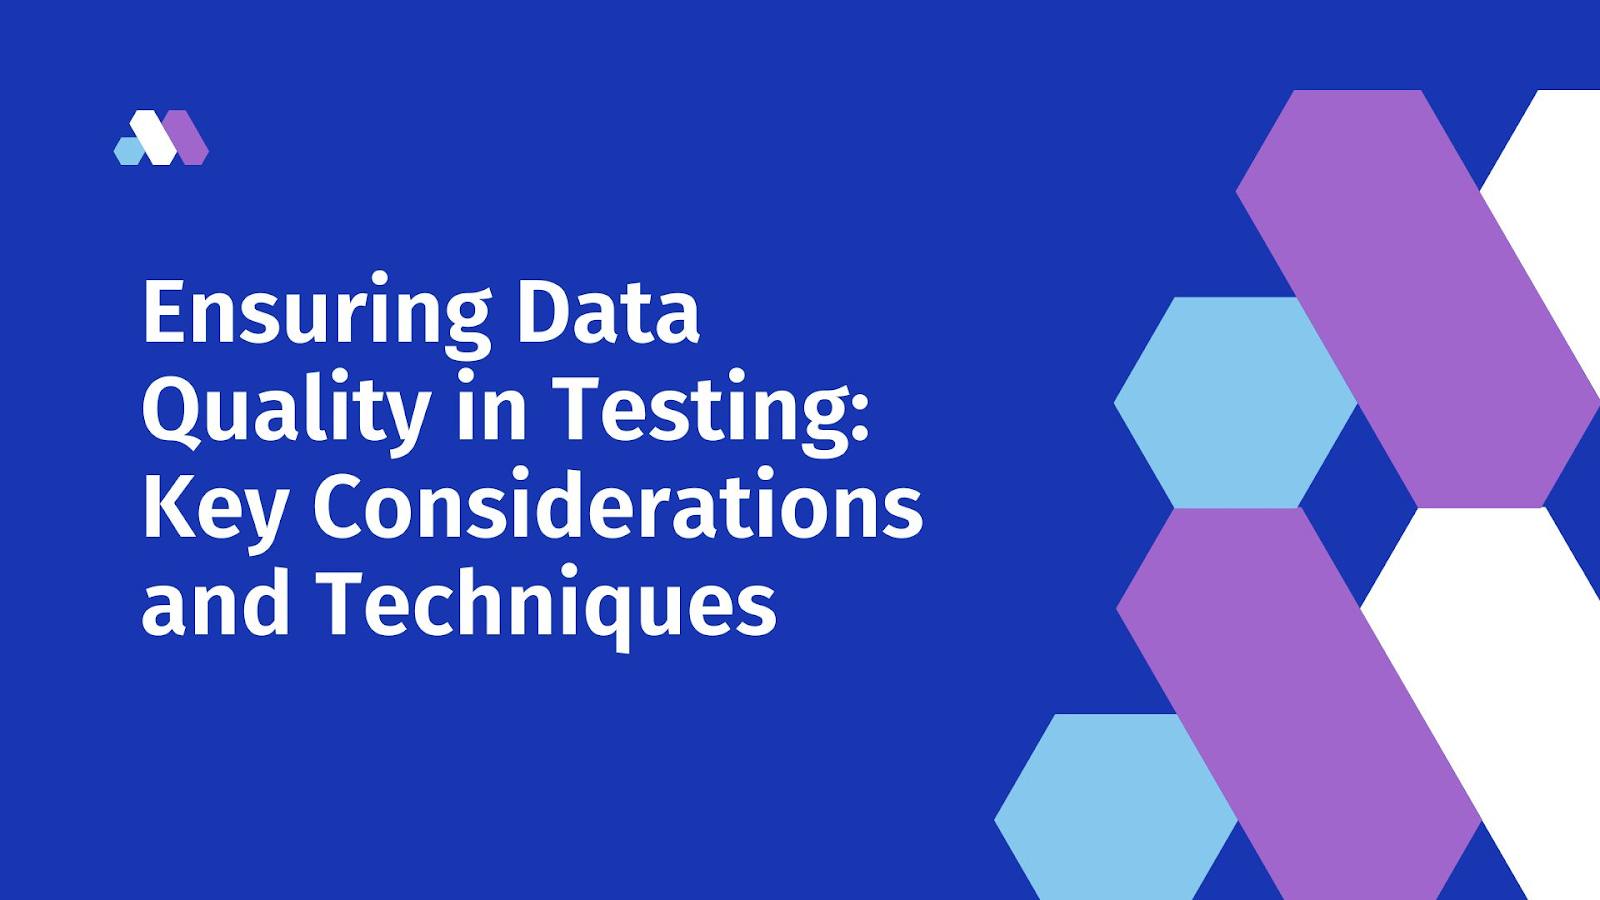 Ensuring Data Quality in Testing: Key Considerations and Techniques